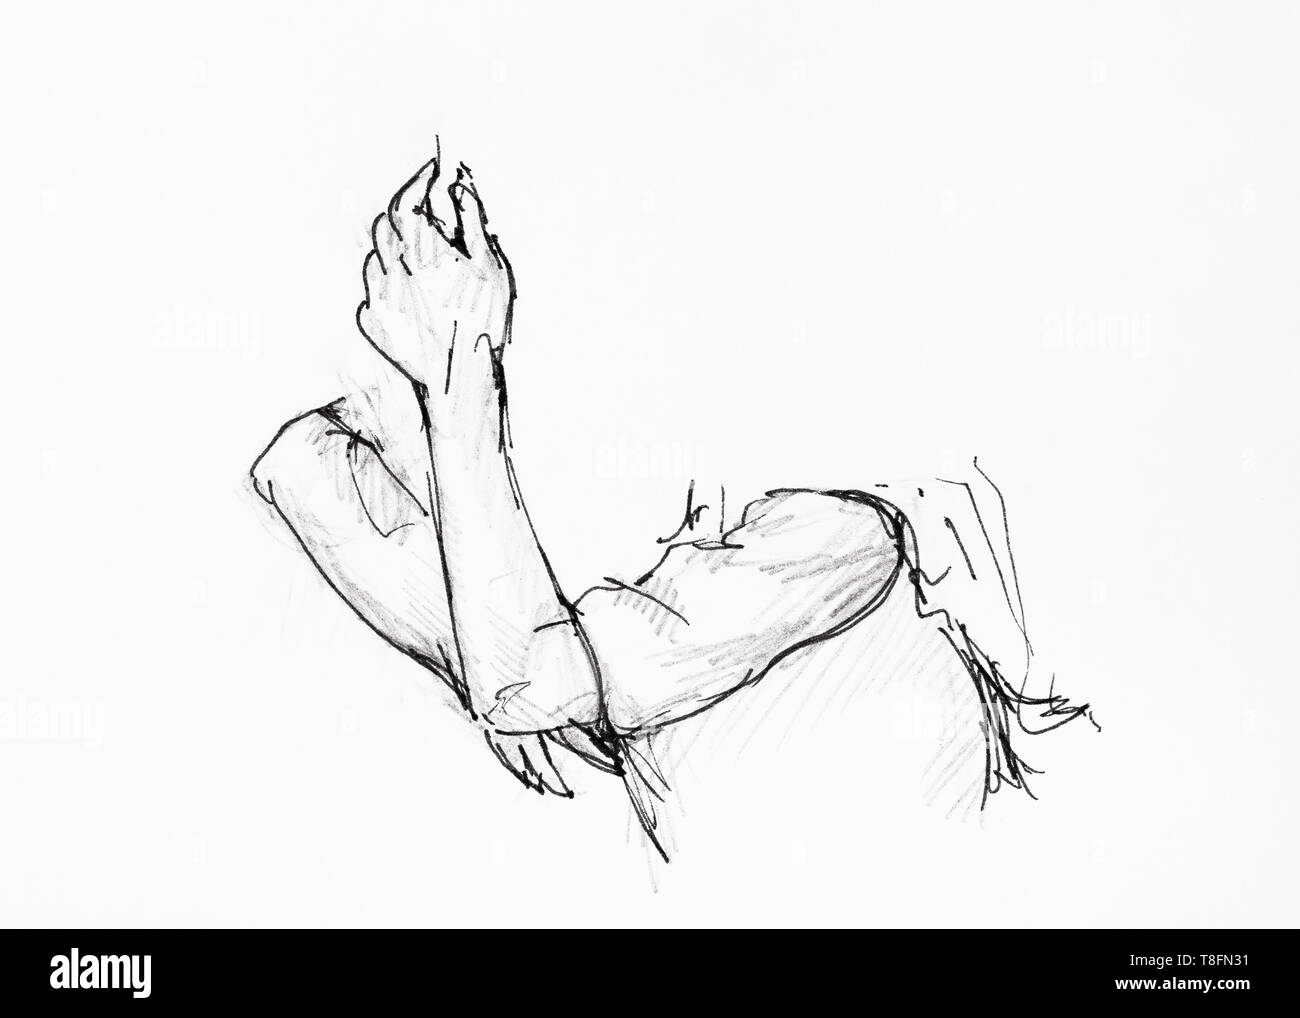 sketch of gesture of human arms hand-drawn by black ink and pencil on white paper Stock Photo